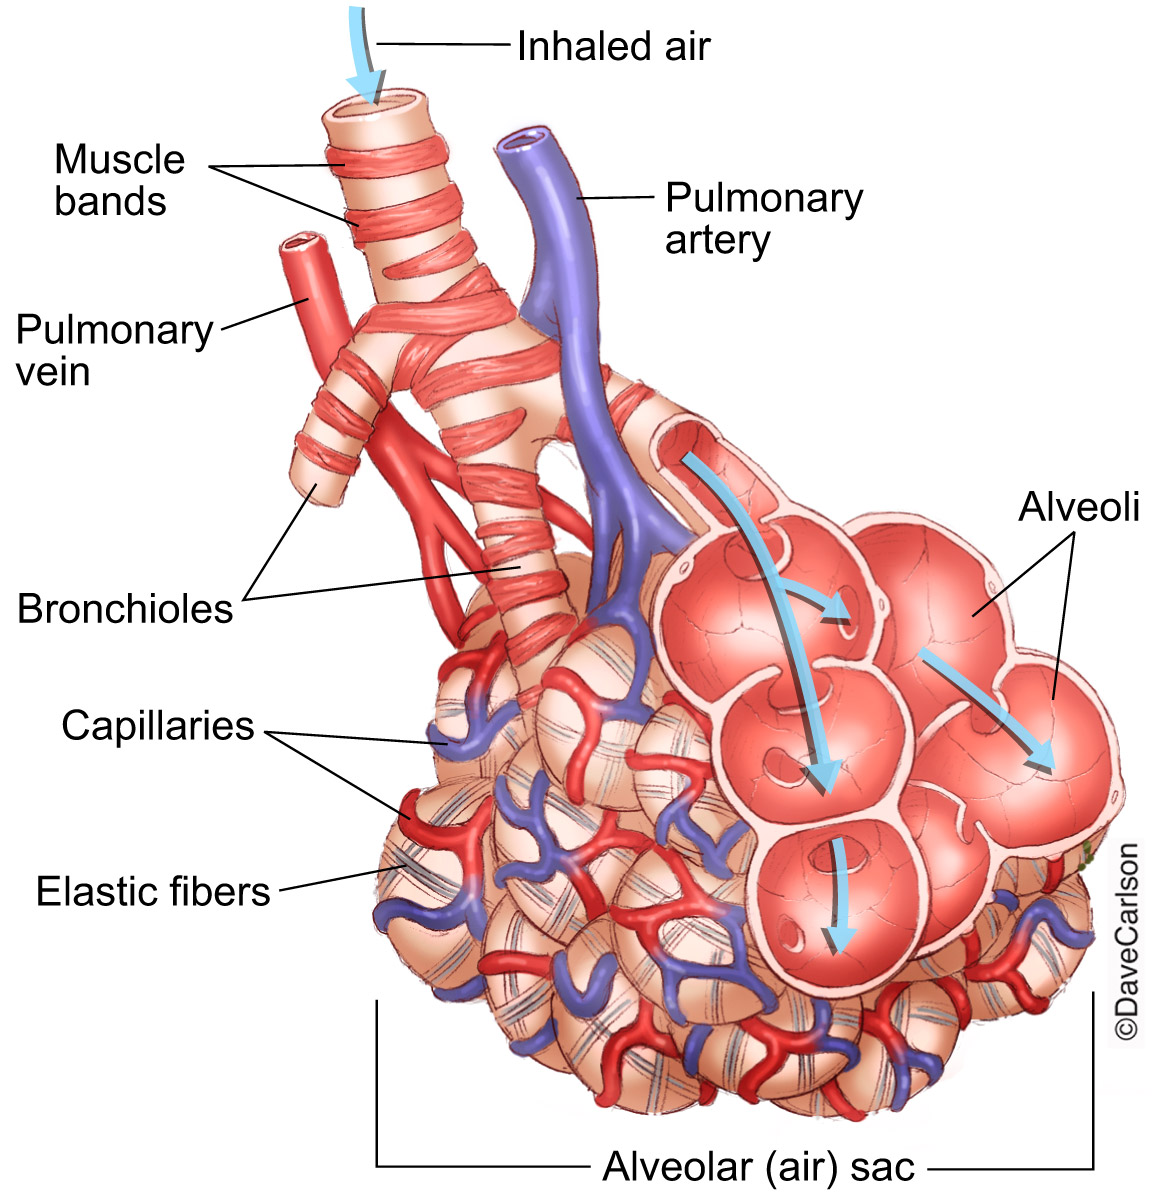 Illustration of lung bronchioles, alveoli, blood vessels and associated structures.